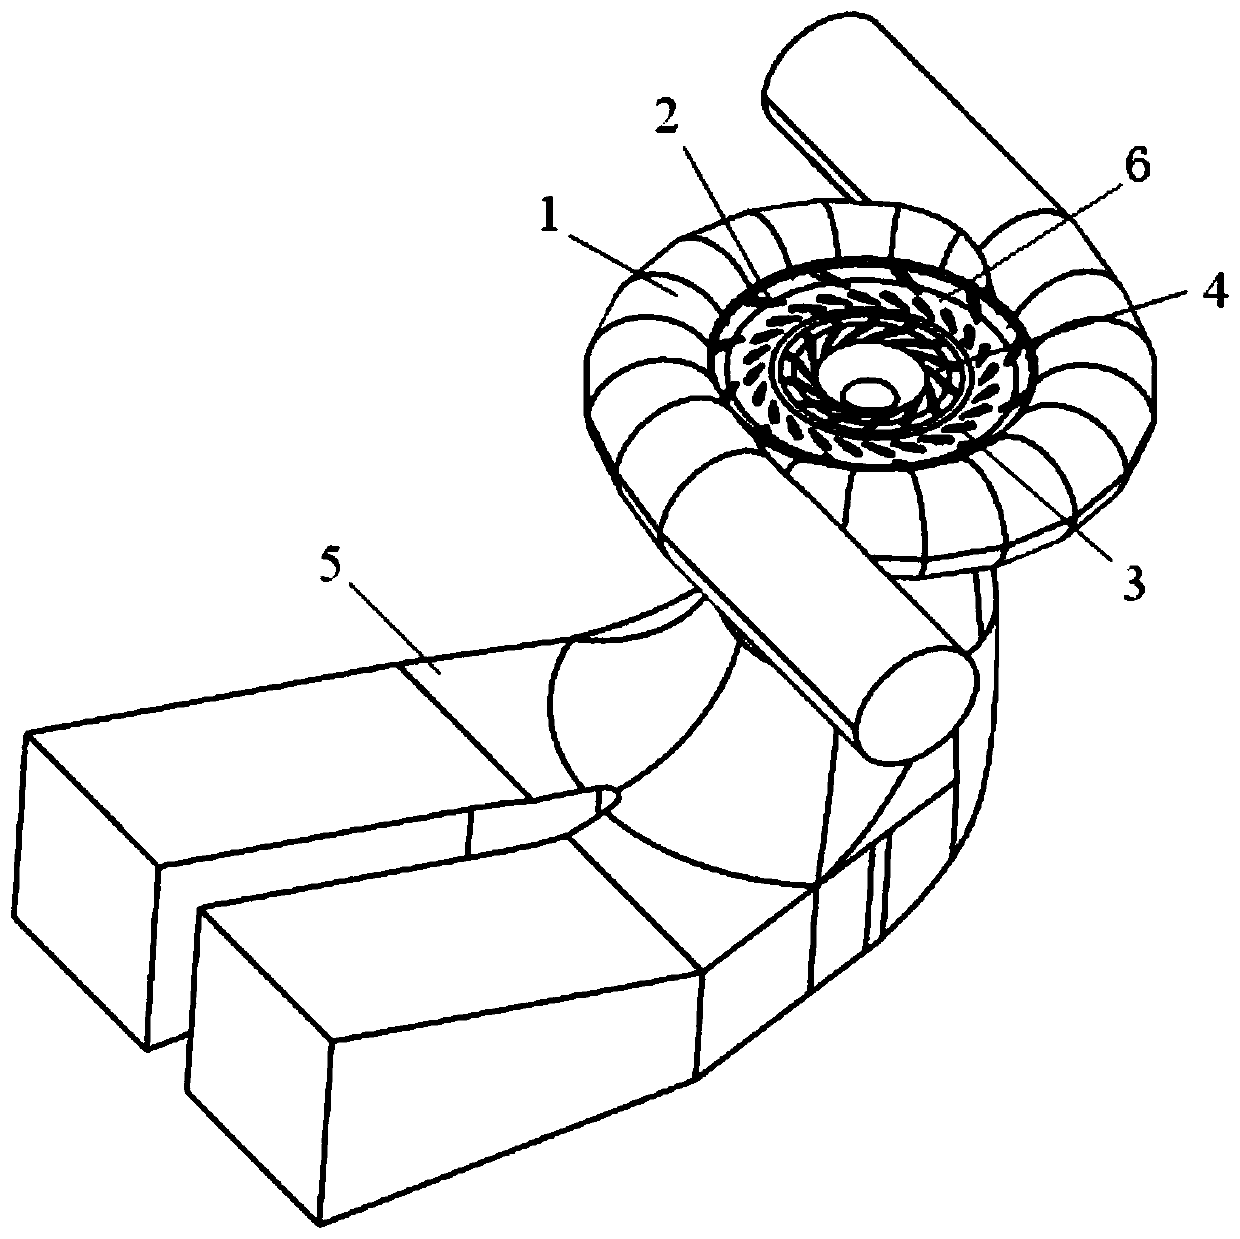 Low-specific-speed mixed-flow water turbine with double-inlet volute